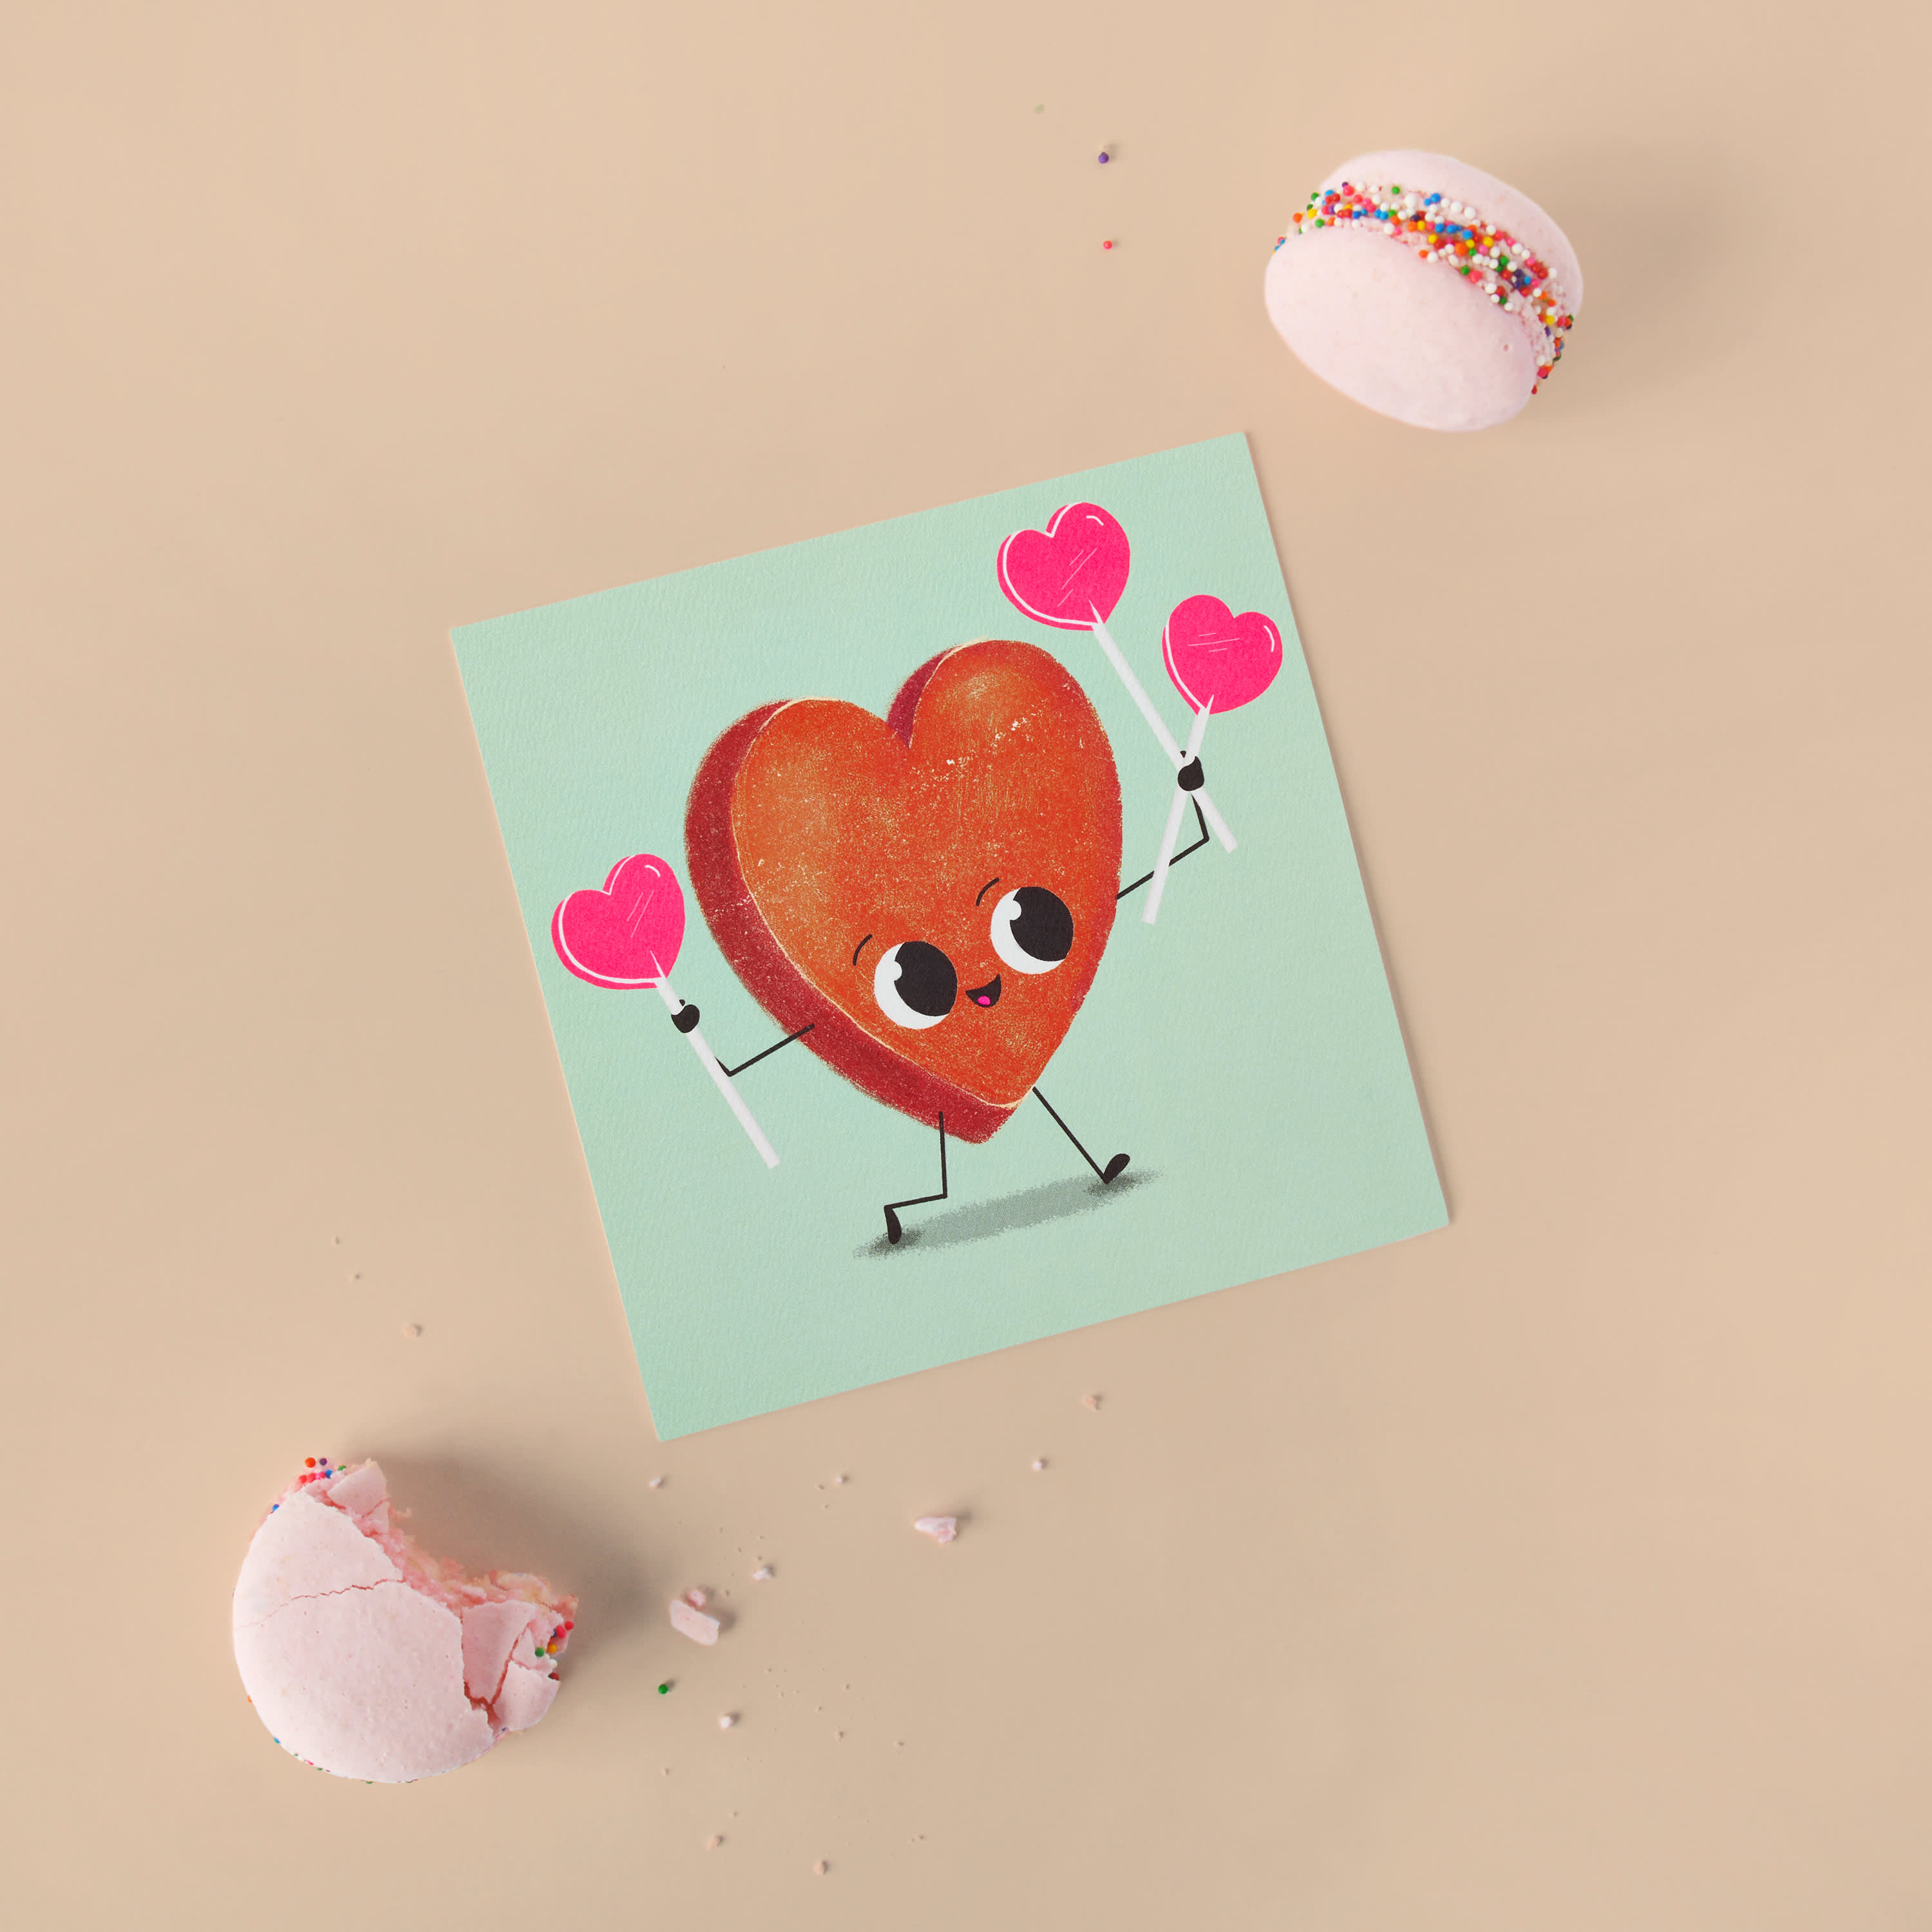 Candy Heart Valentine's Day Cards, 6-Count image